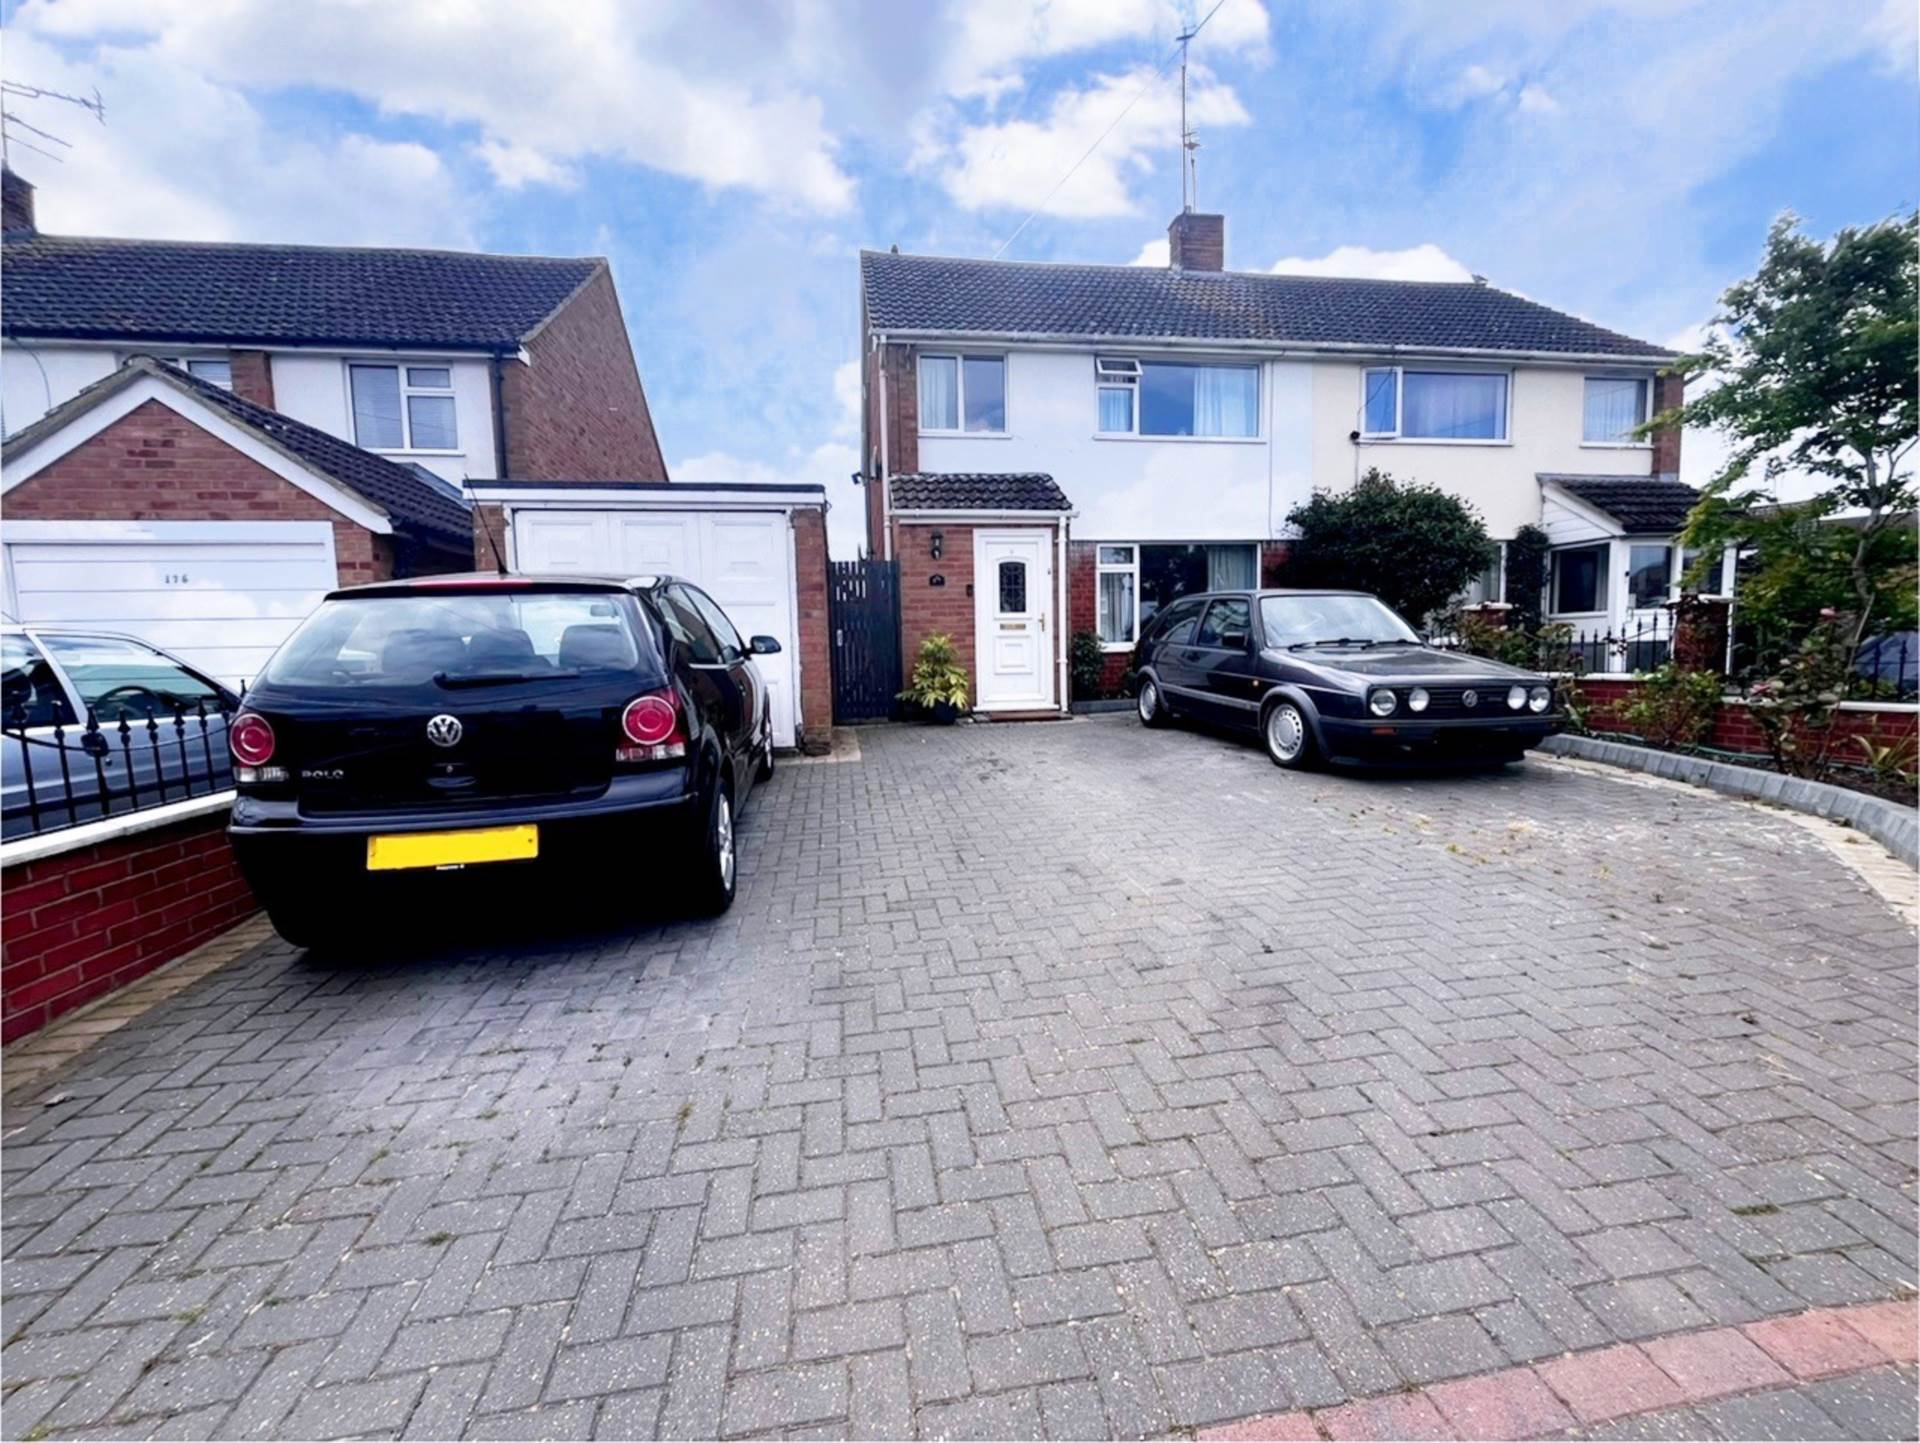 3 bed Semi-Detached House for rent in Aylesbury. From Knights Lettings - Boxmoor